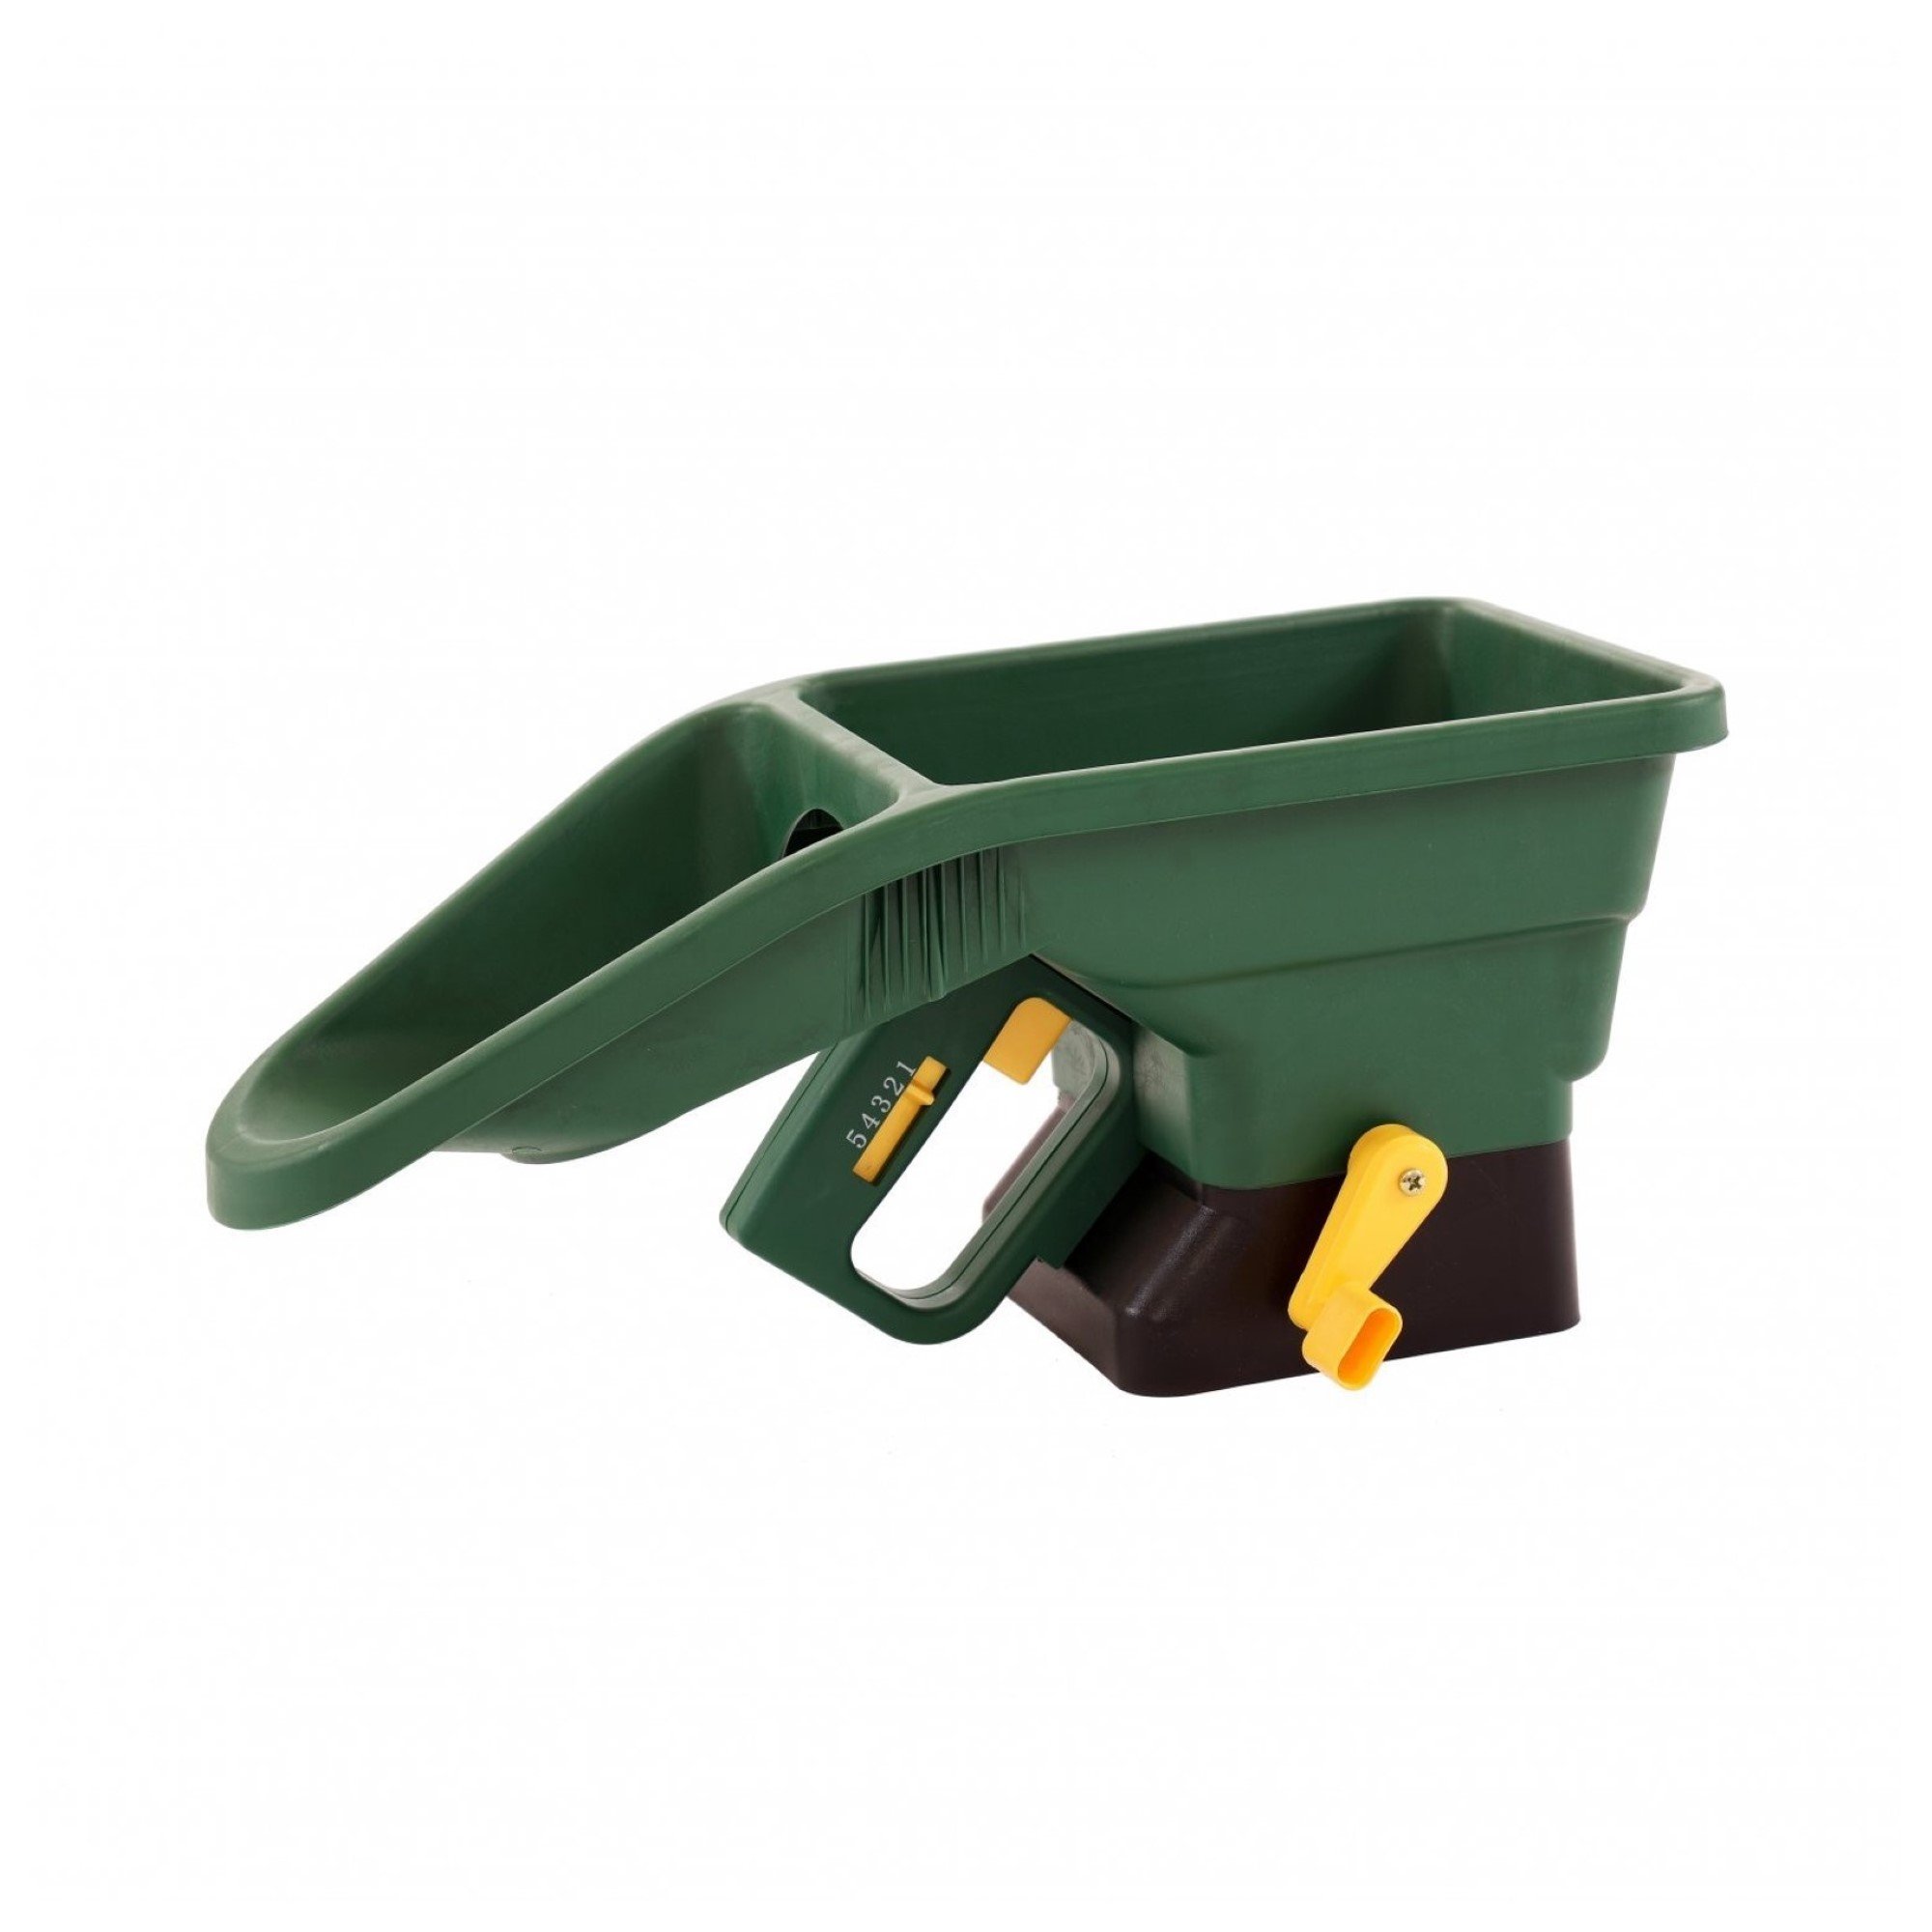 Spread Fertilizers Reusable Feed Shaker Complete with Scoop Bonus ReRoot Hand Fertilizer Spreader with Adjustable Lid Salt to Deice or Melt Ice Year Round Use Lawn Seed Insecticide 